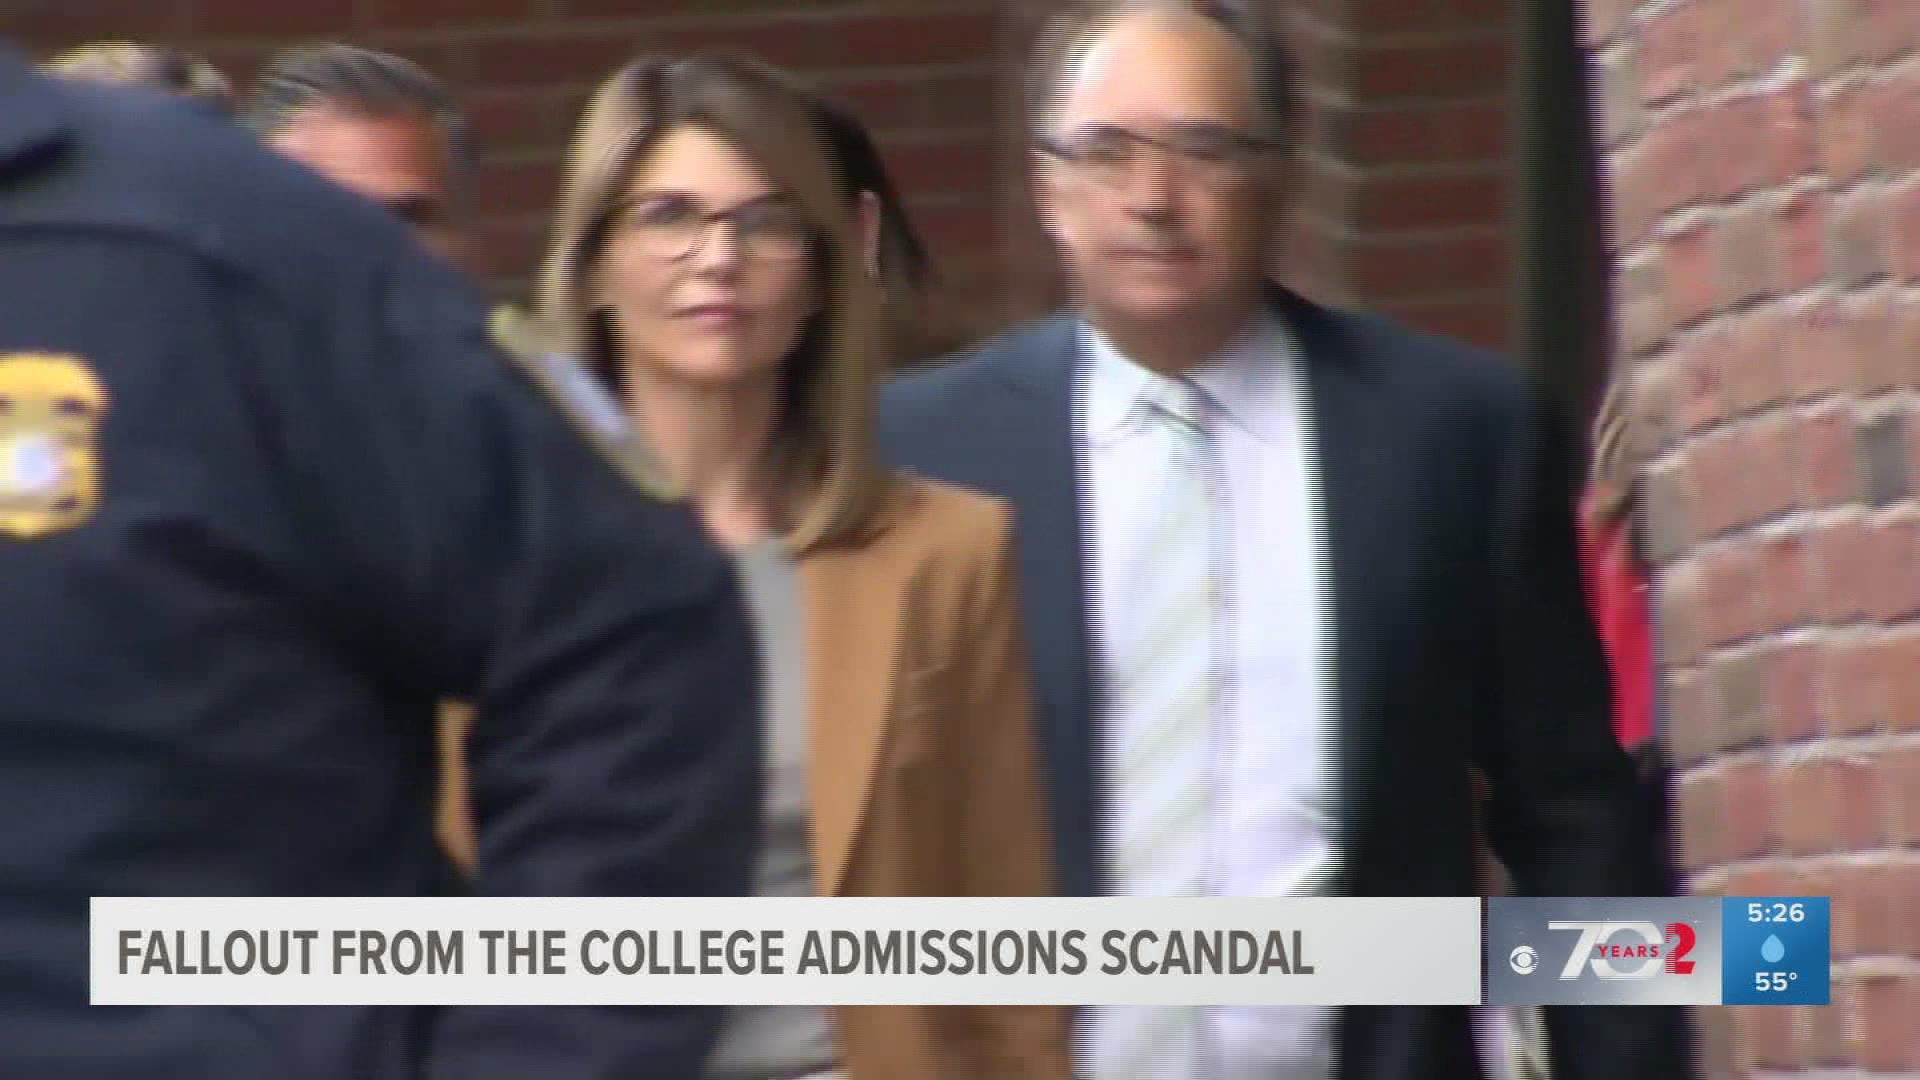 It's one of the biggest scandals in college education history, so how can the parents and kids involved move on?